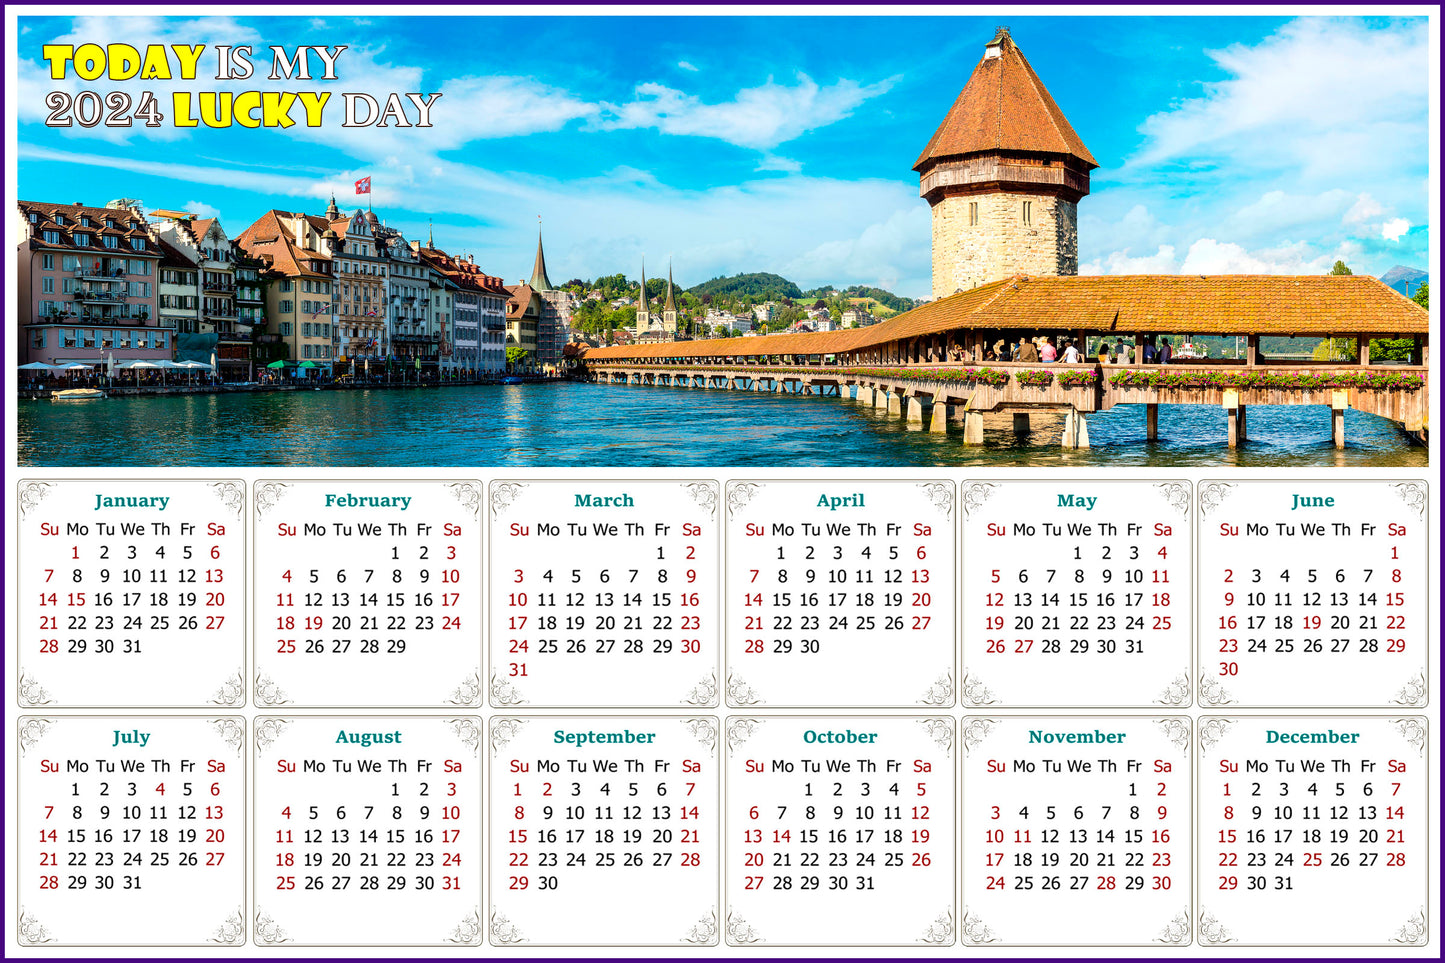 2024 Magnetic Calendar - Calendar Magnets - Today is my Lucky Day (Chapel bridge in Lucerne, Switzerland)